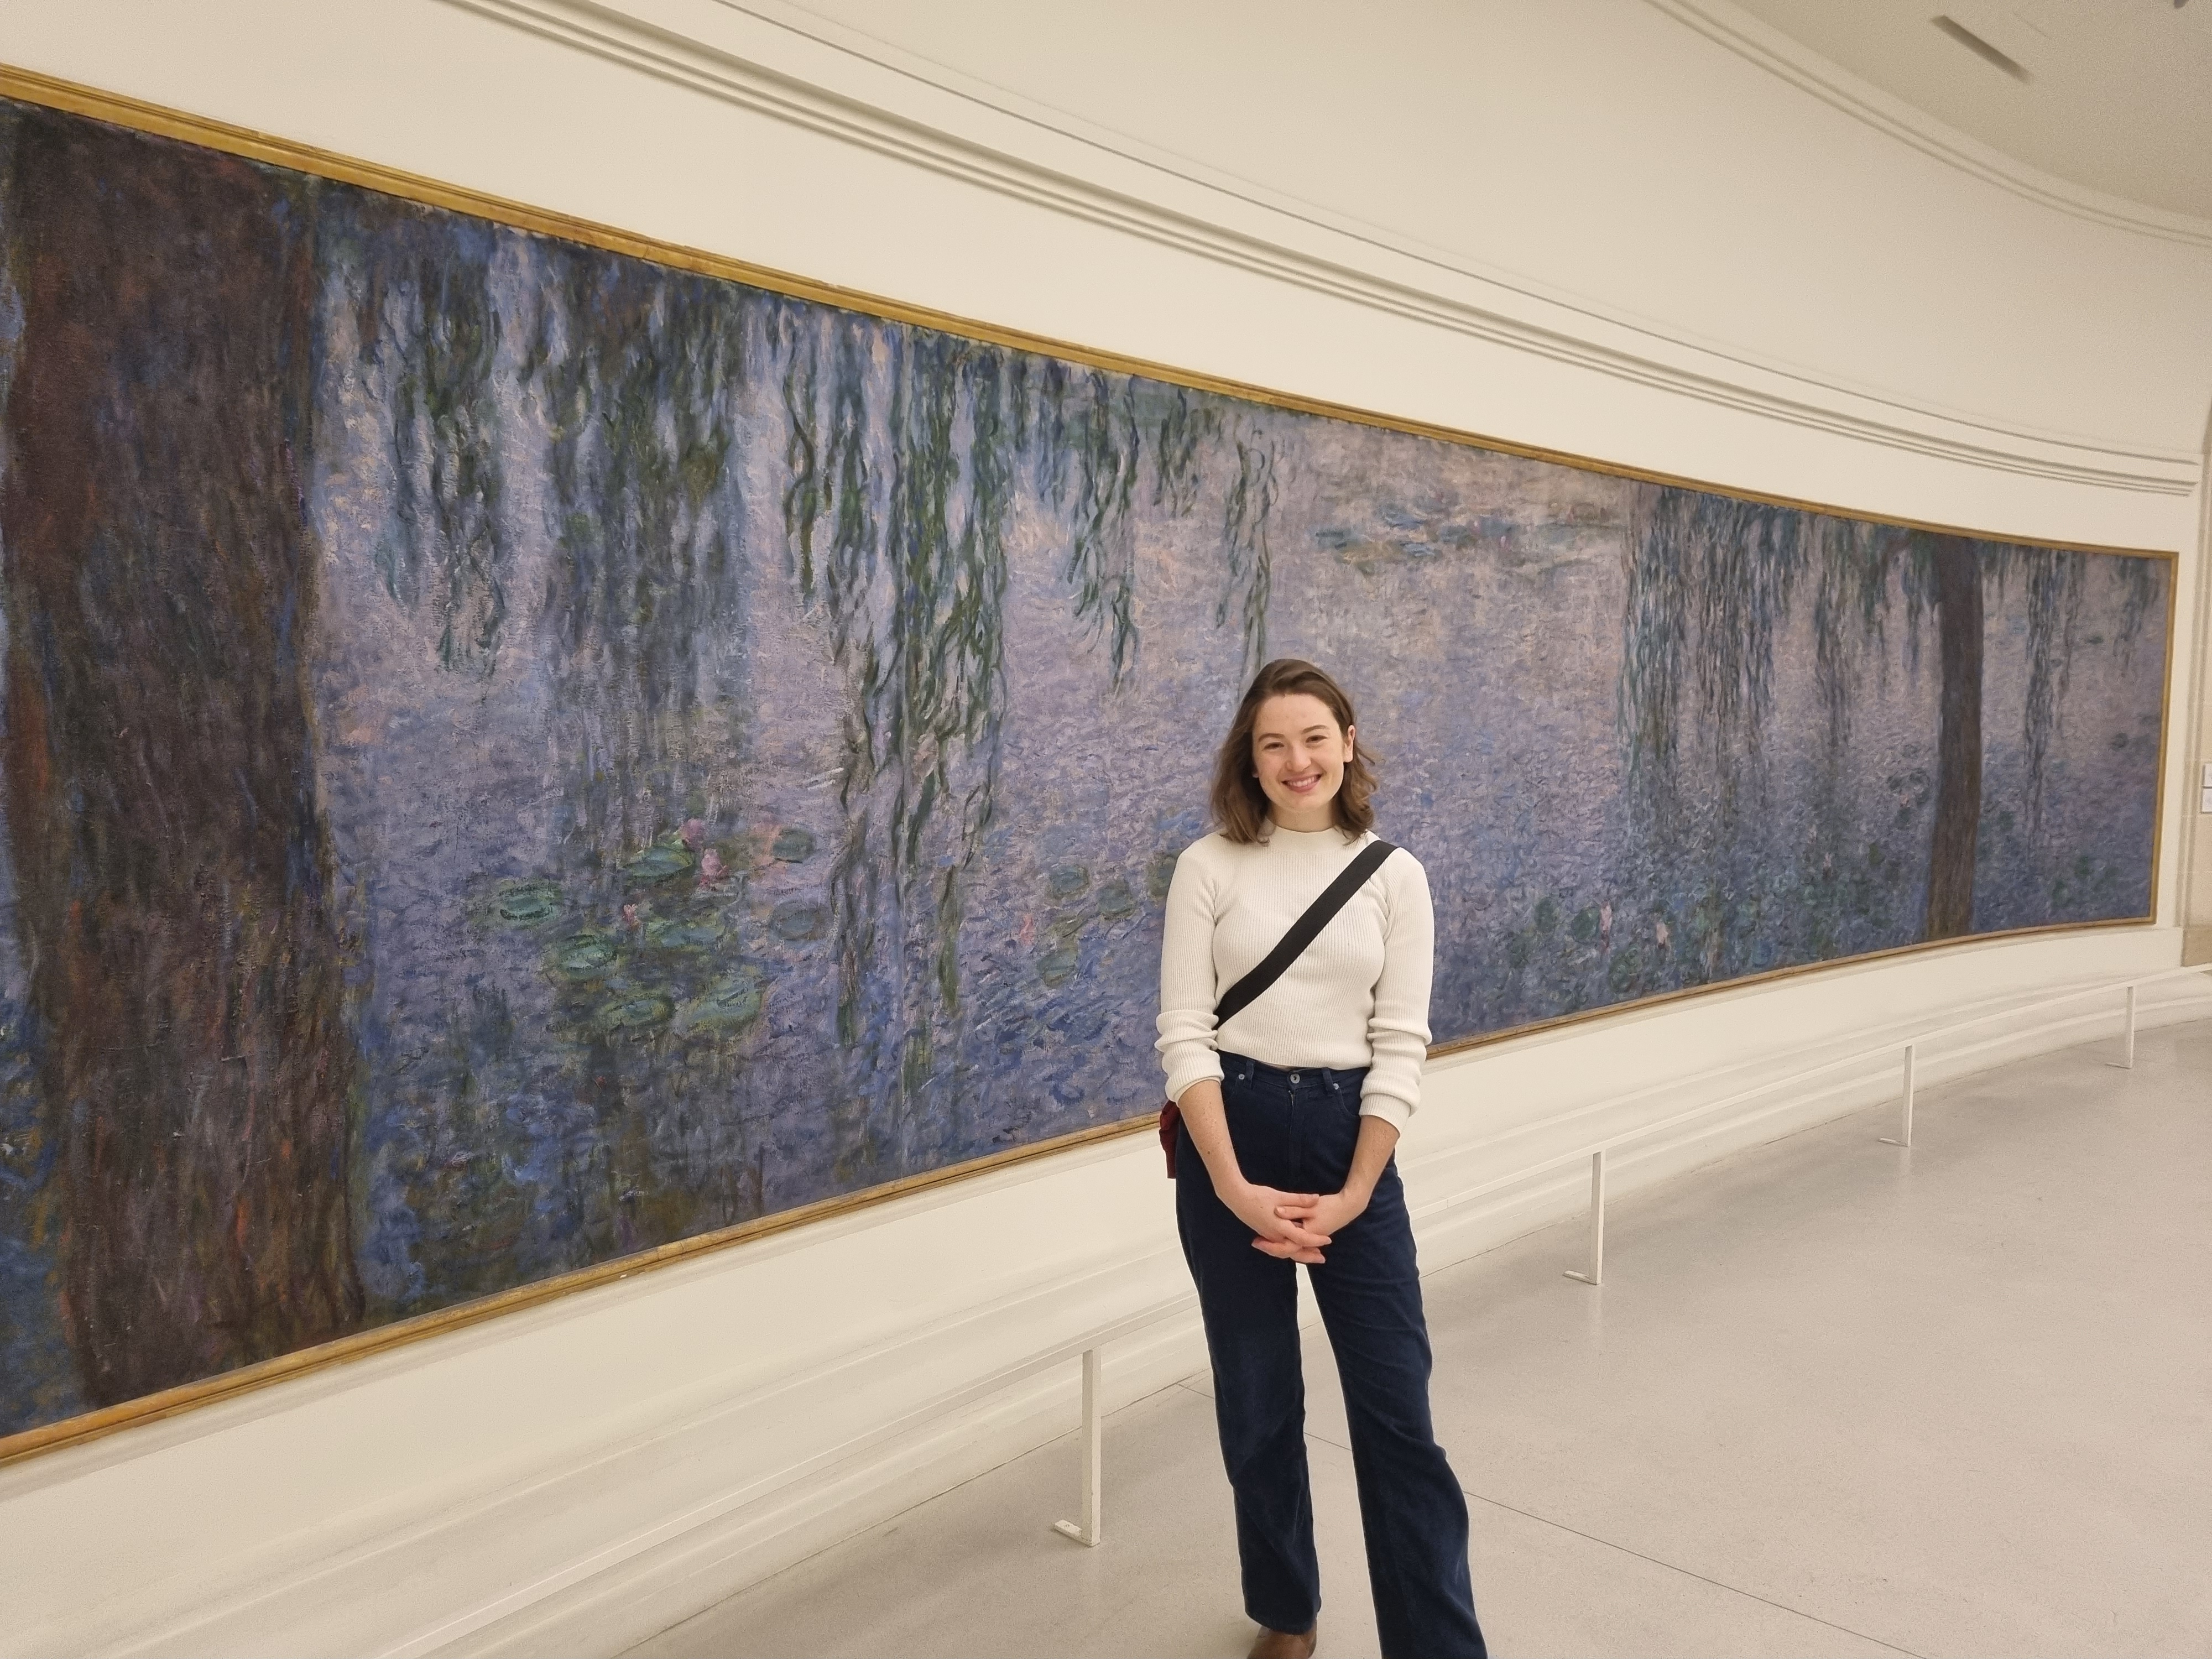 Imogen King stands in front of a Monet painting at the Musée de l'Orangerie